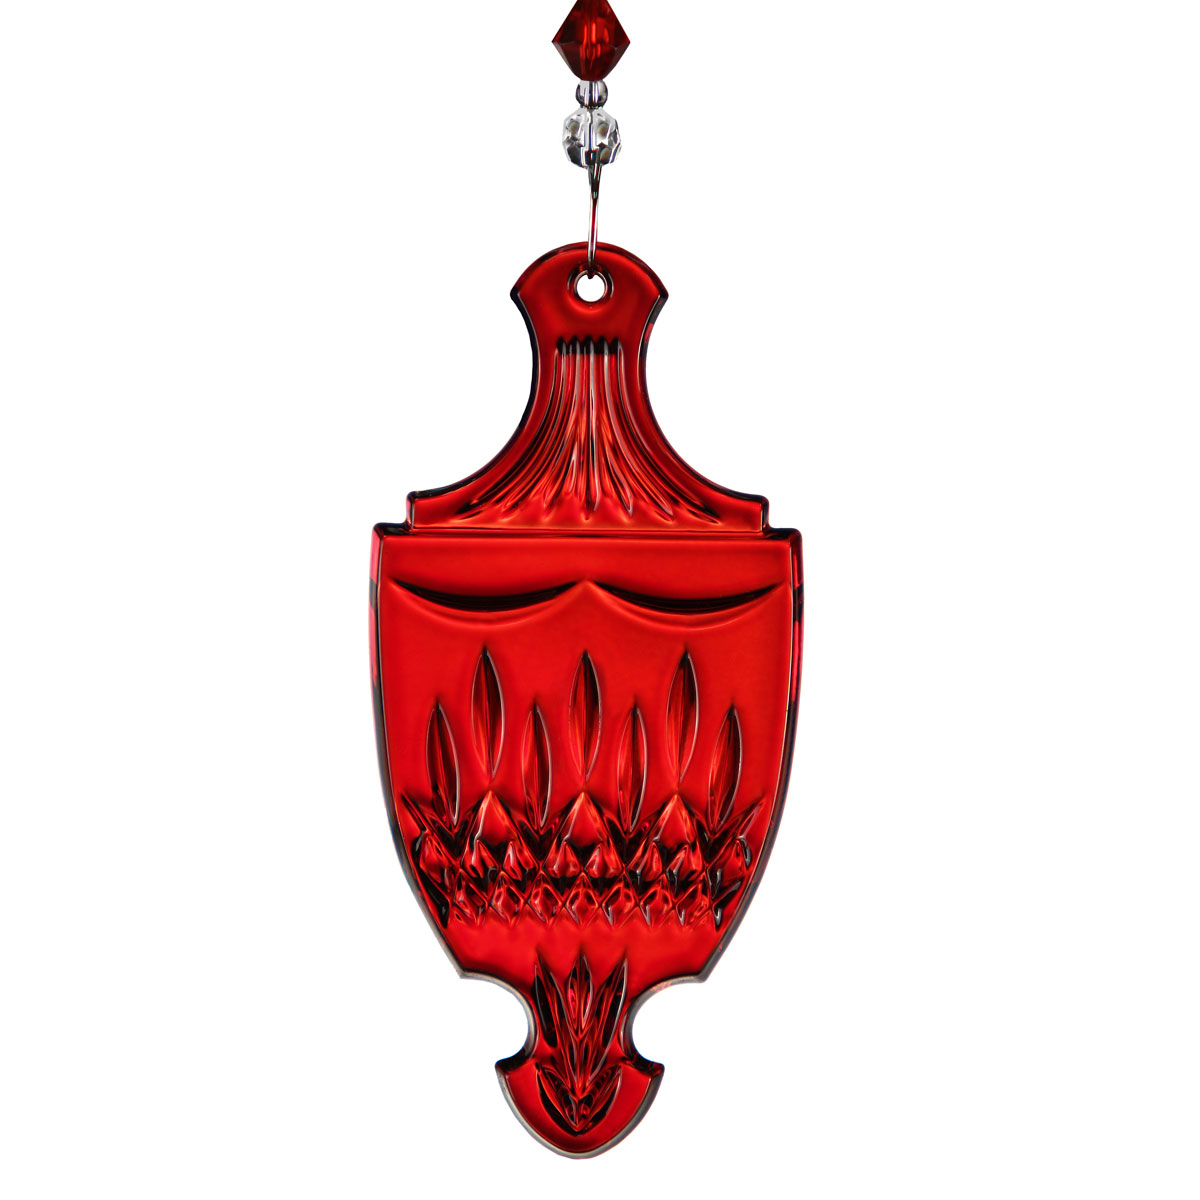 Waterford Crystal, Lismore Celebrations Red Crystal Ornament